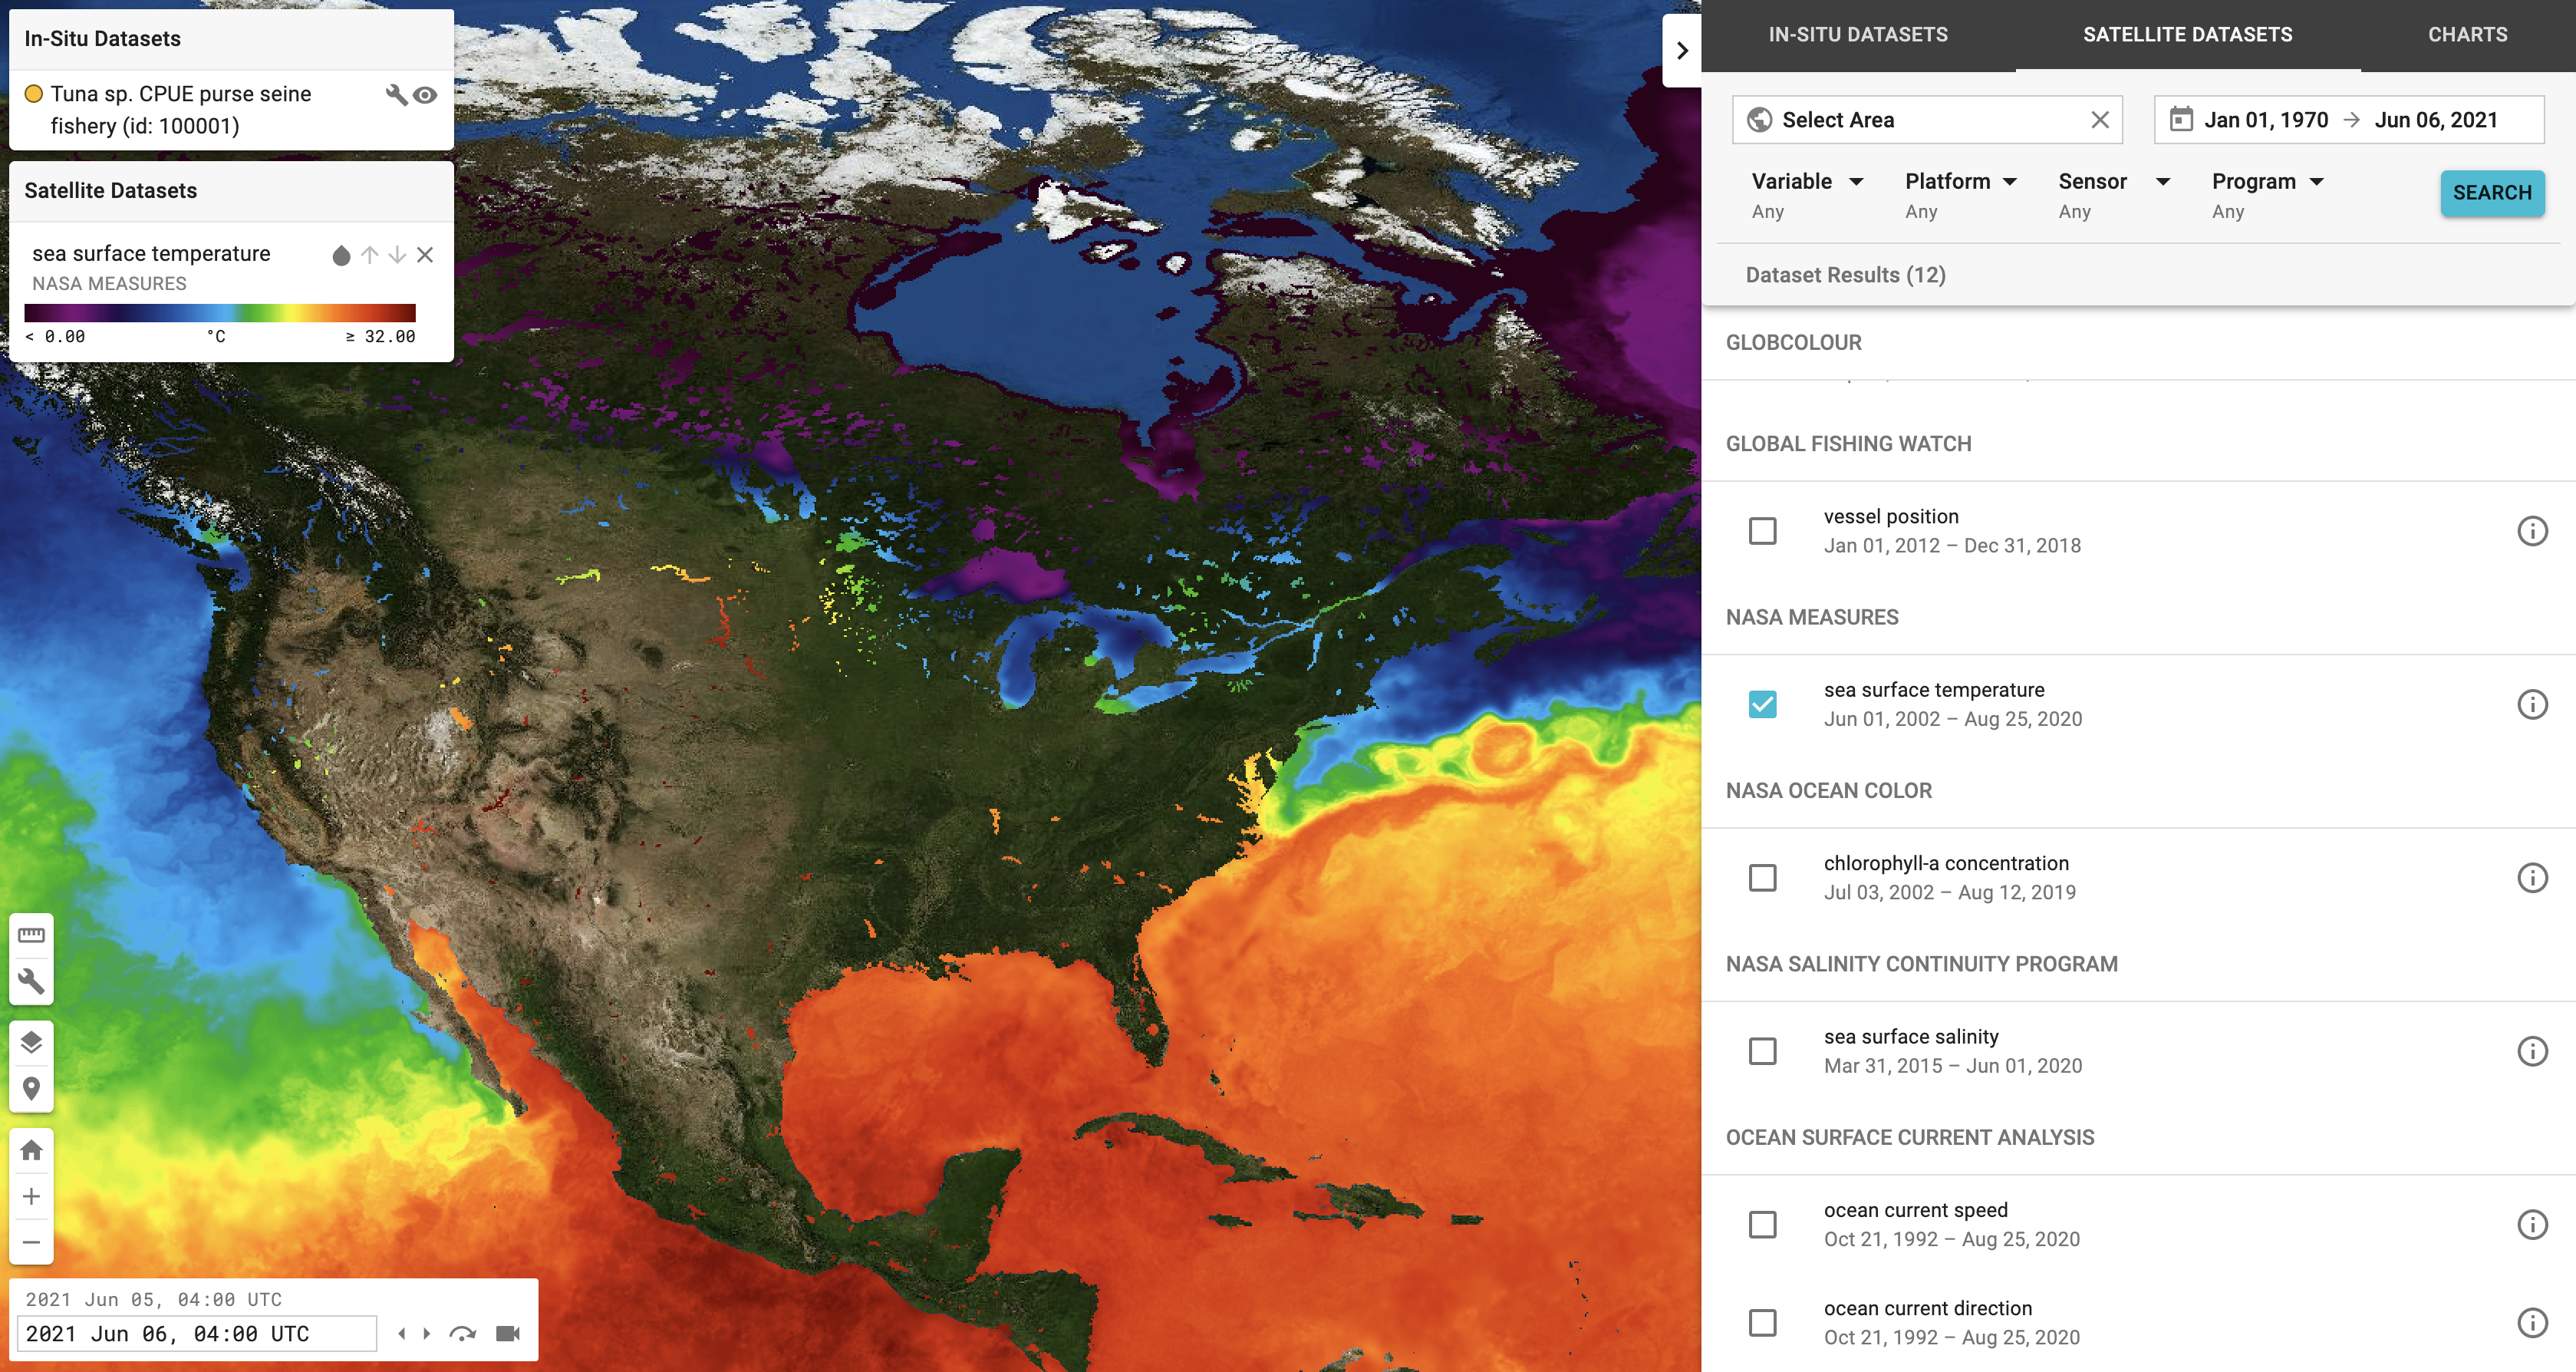 Example visualization tool output showing sea surface temperature data